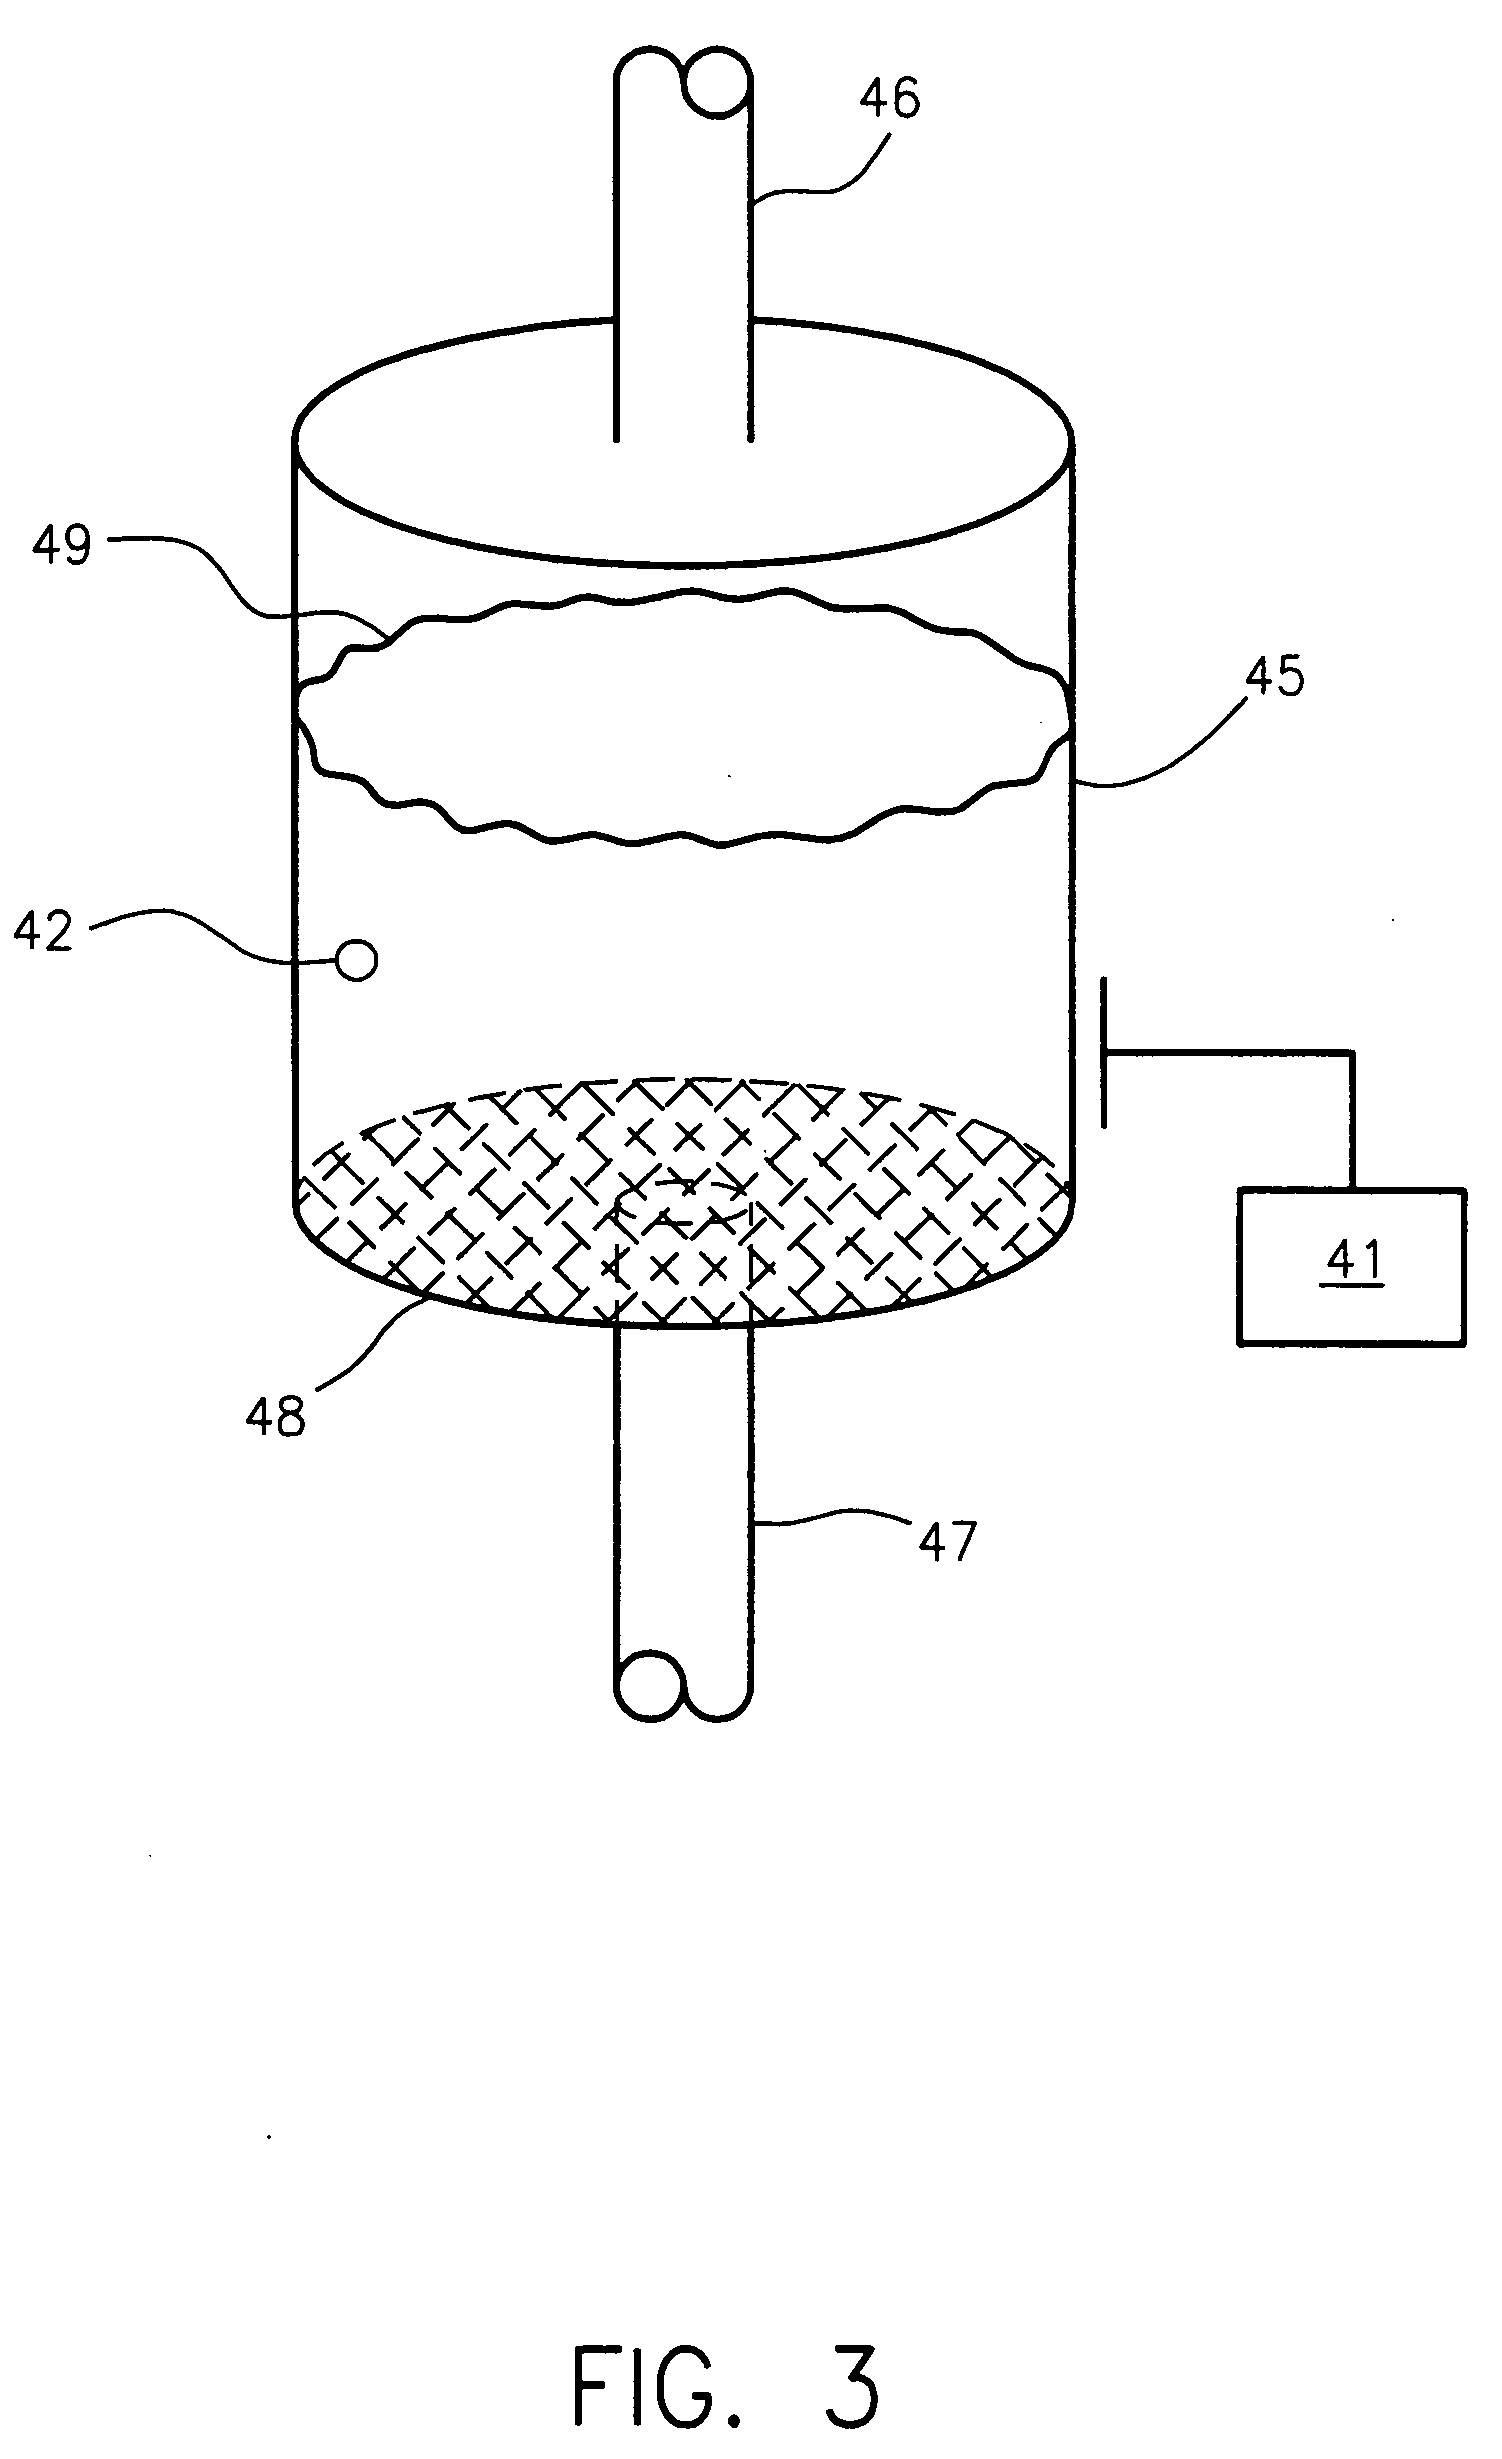 Apparatus, system and method for generating bubbles on demand